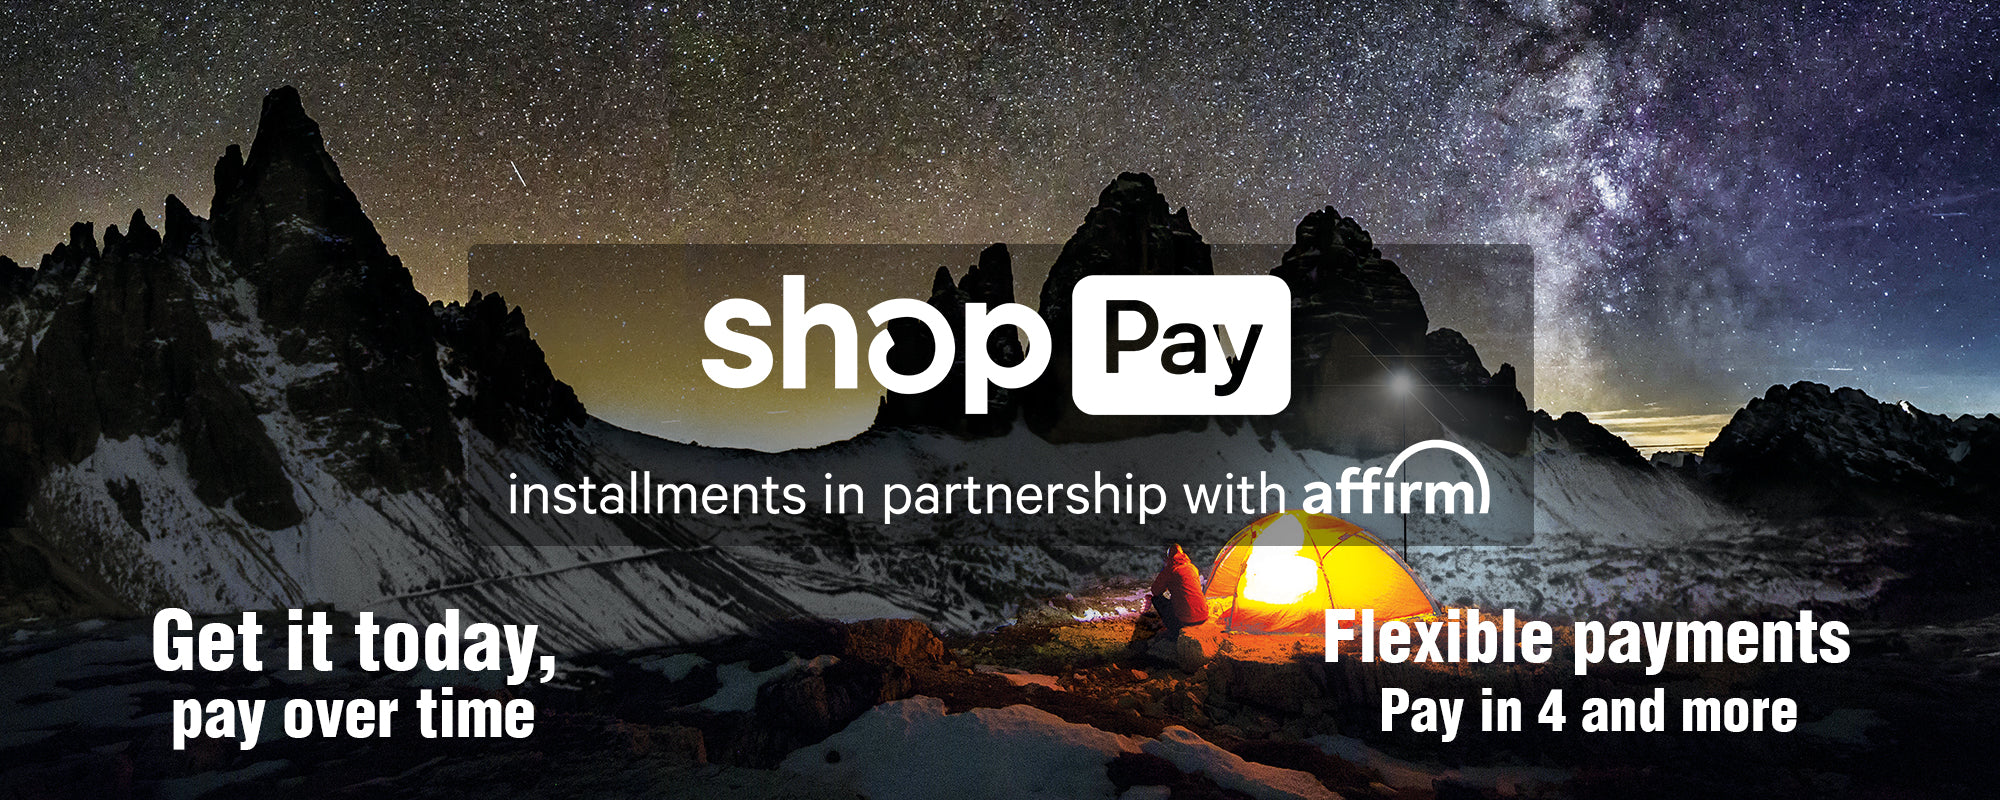 Shop Pay payment plans banner with nighttime camping scene in the background. Text reads: installments in partnership with affirm. Get it today, pay over time. Flexible payments. Pay in 4 and more.